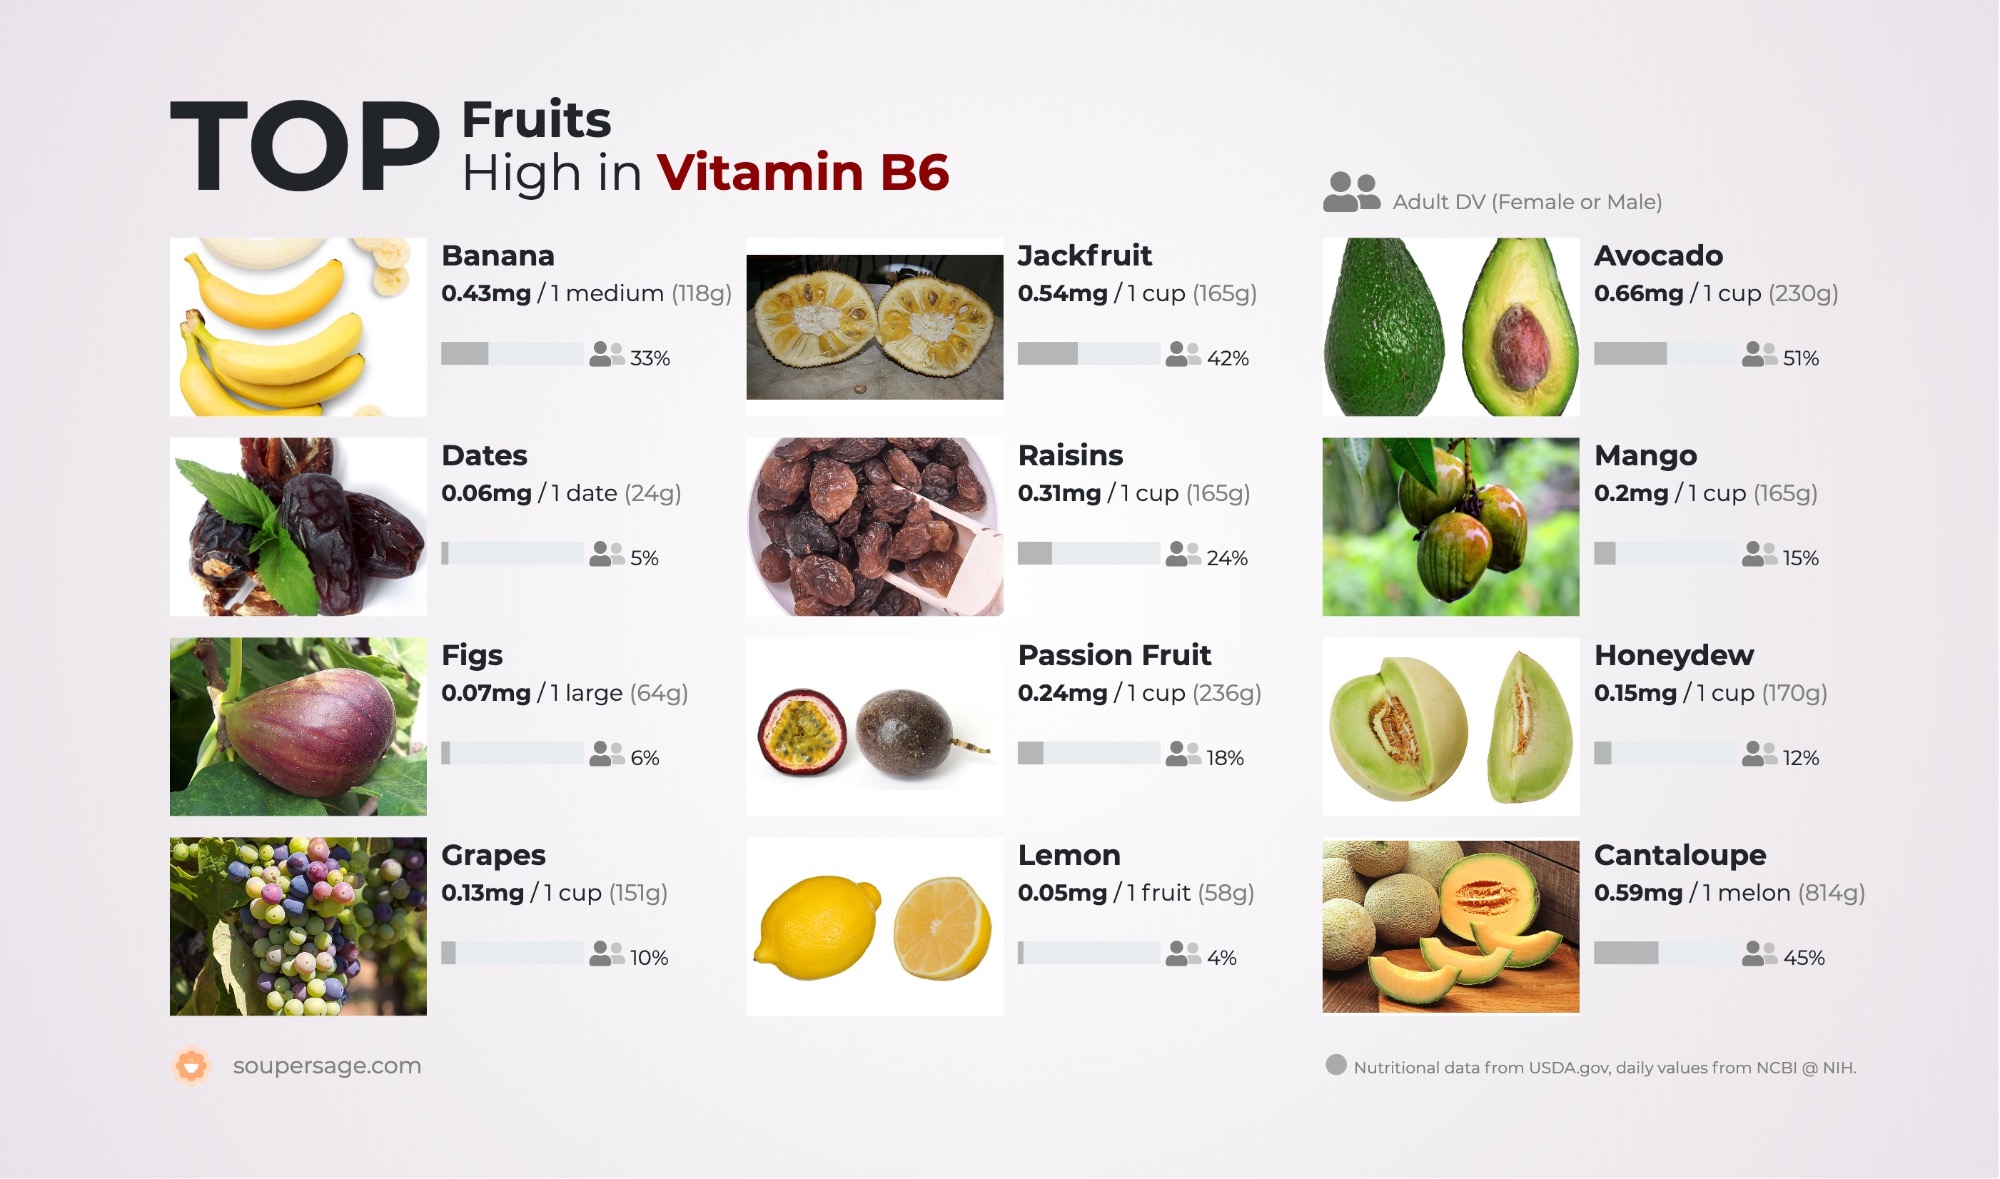 image of Top Fruits High in Vitamin B6